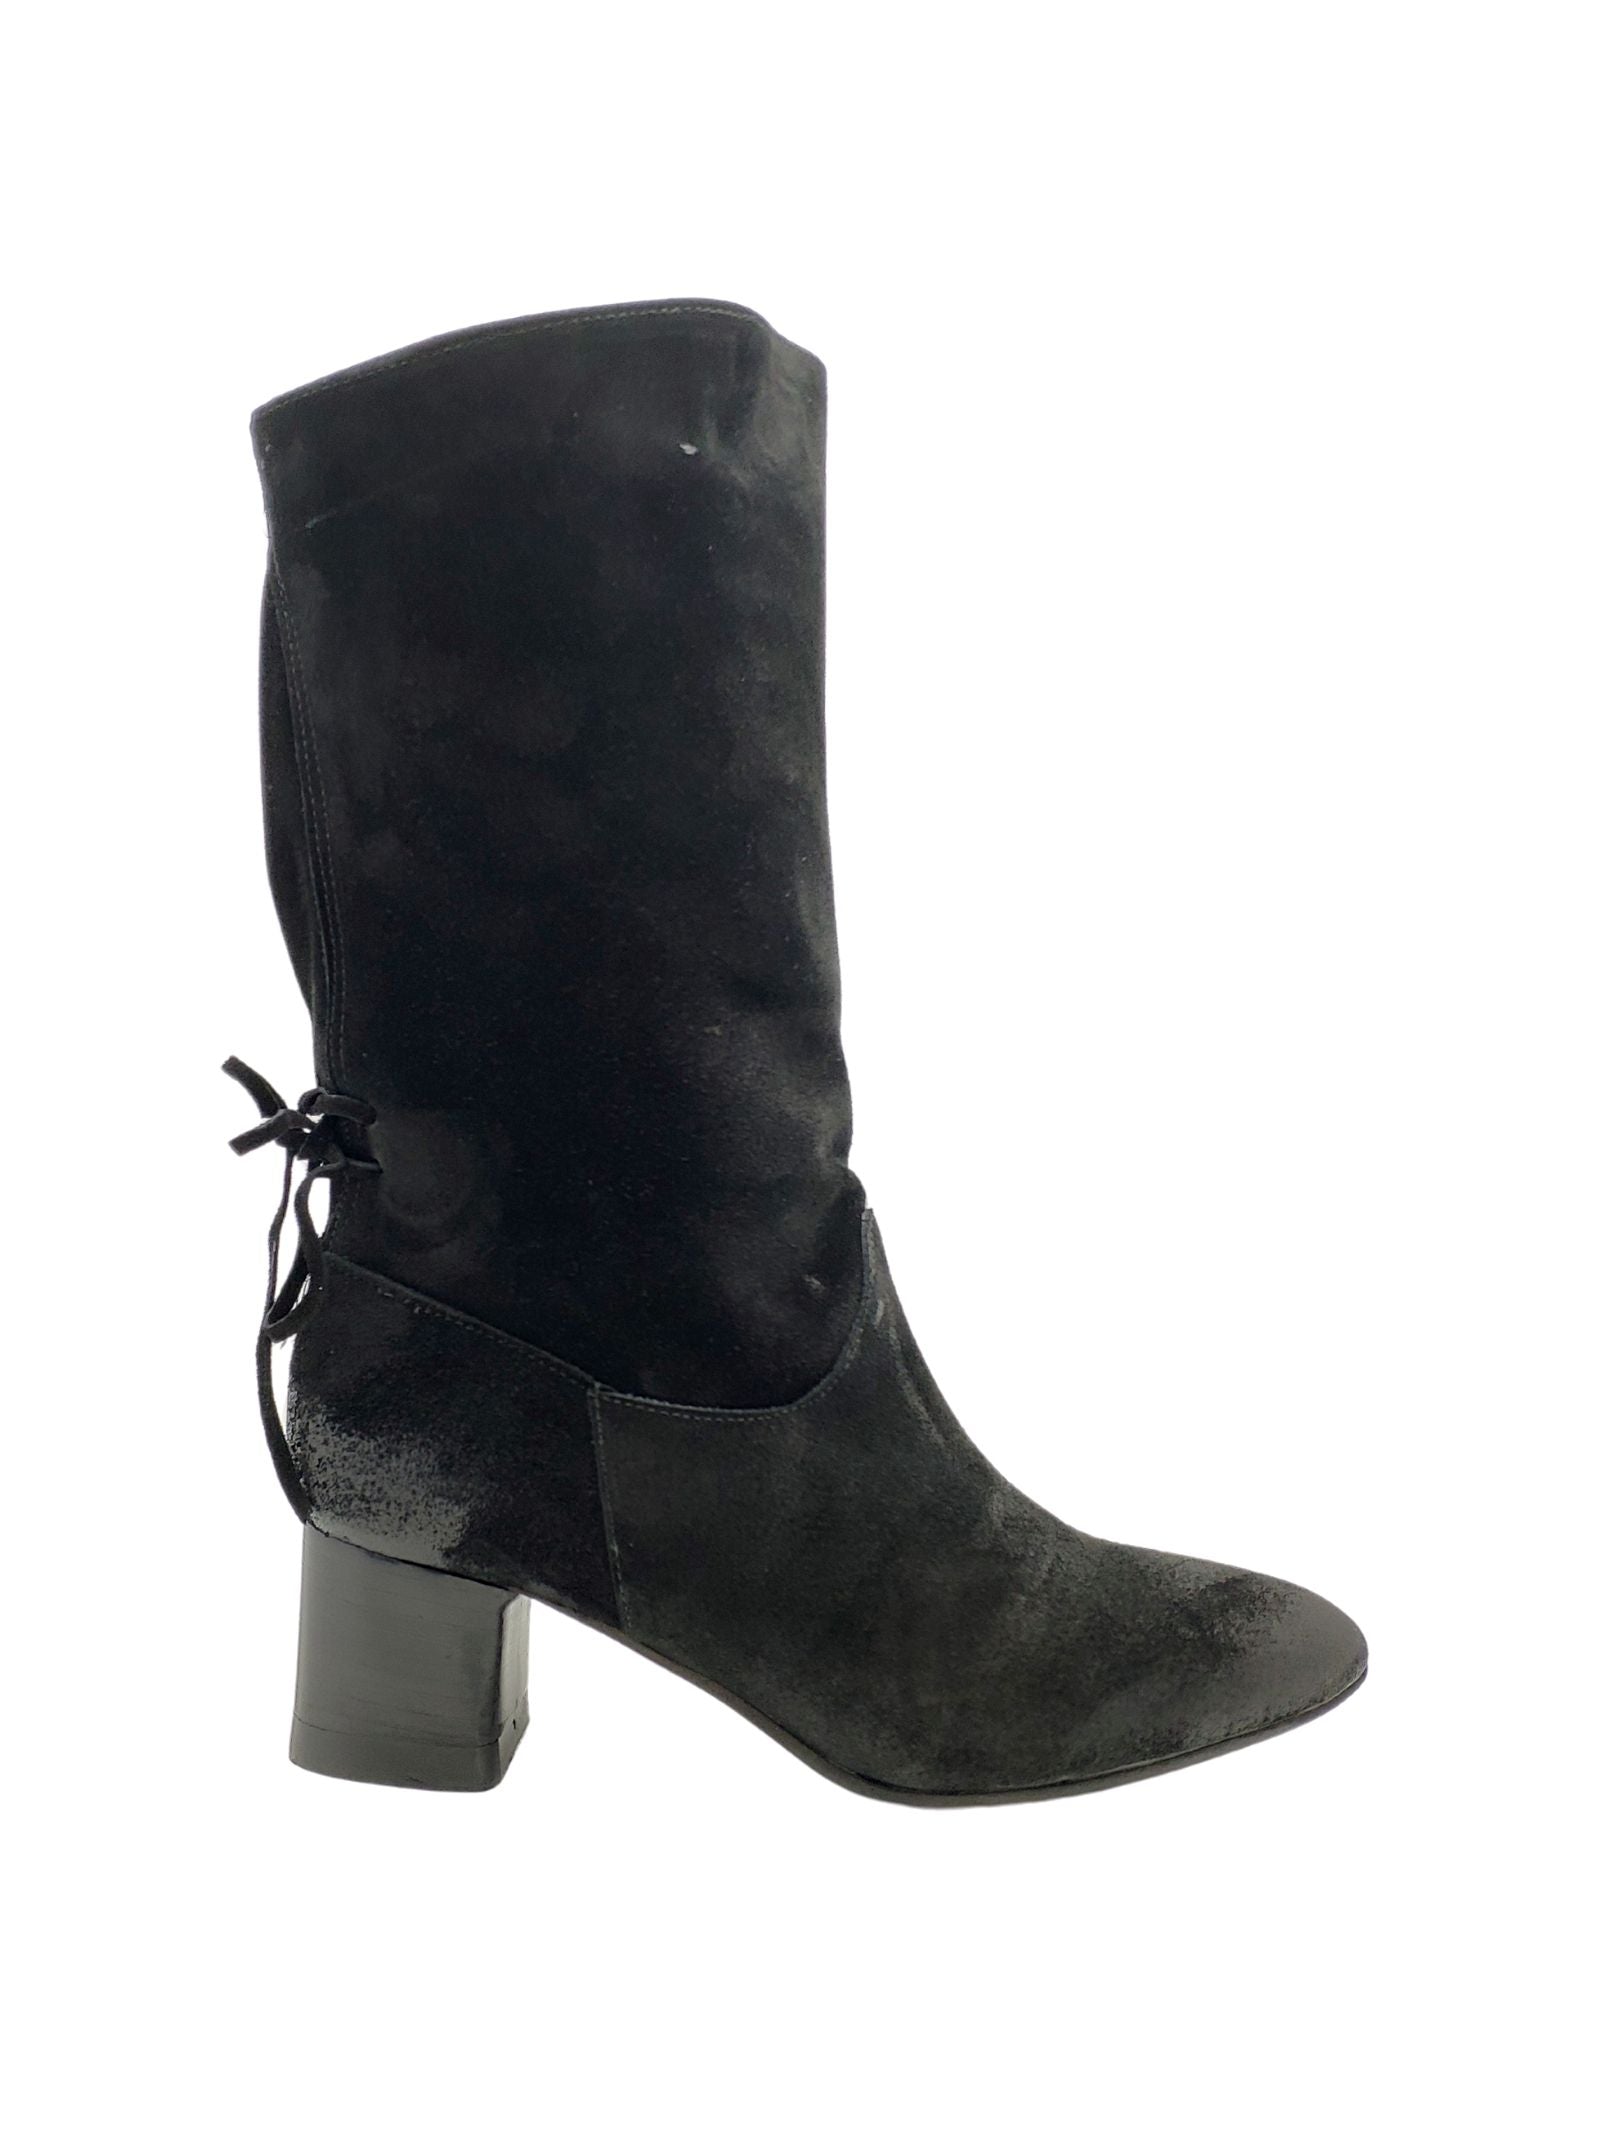 Women's Footwear Ankle Boots in Black Oiled Suede with Back Bow and Heel